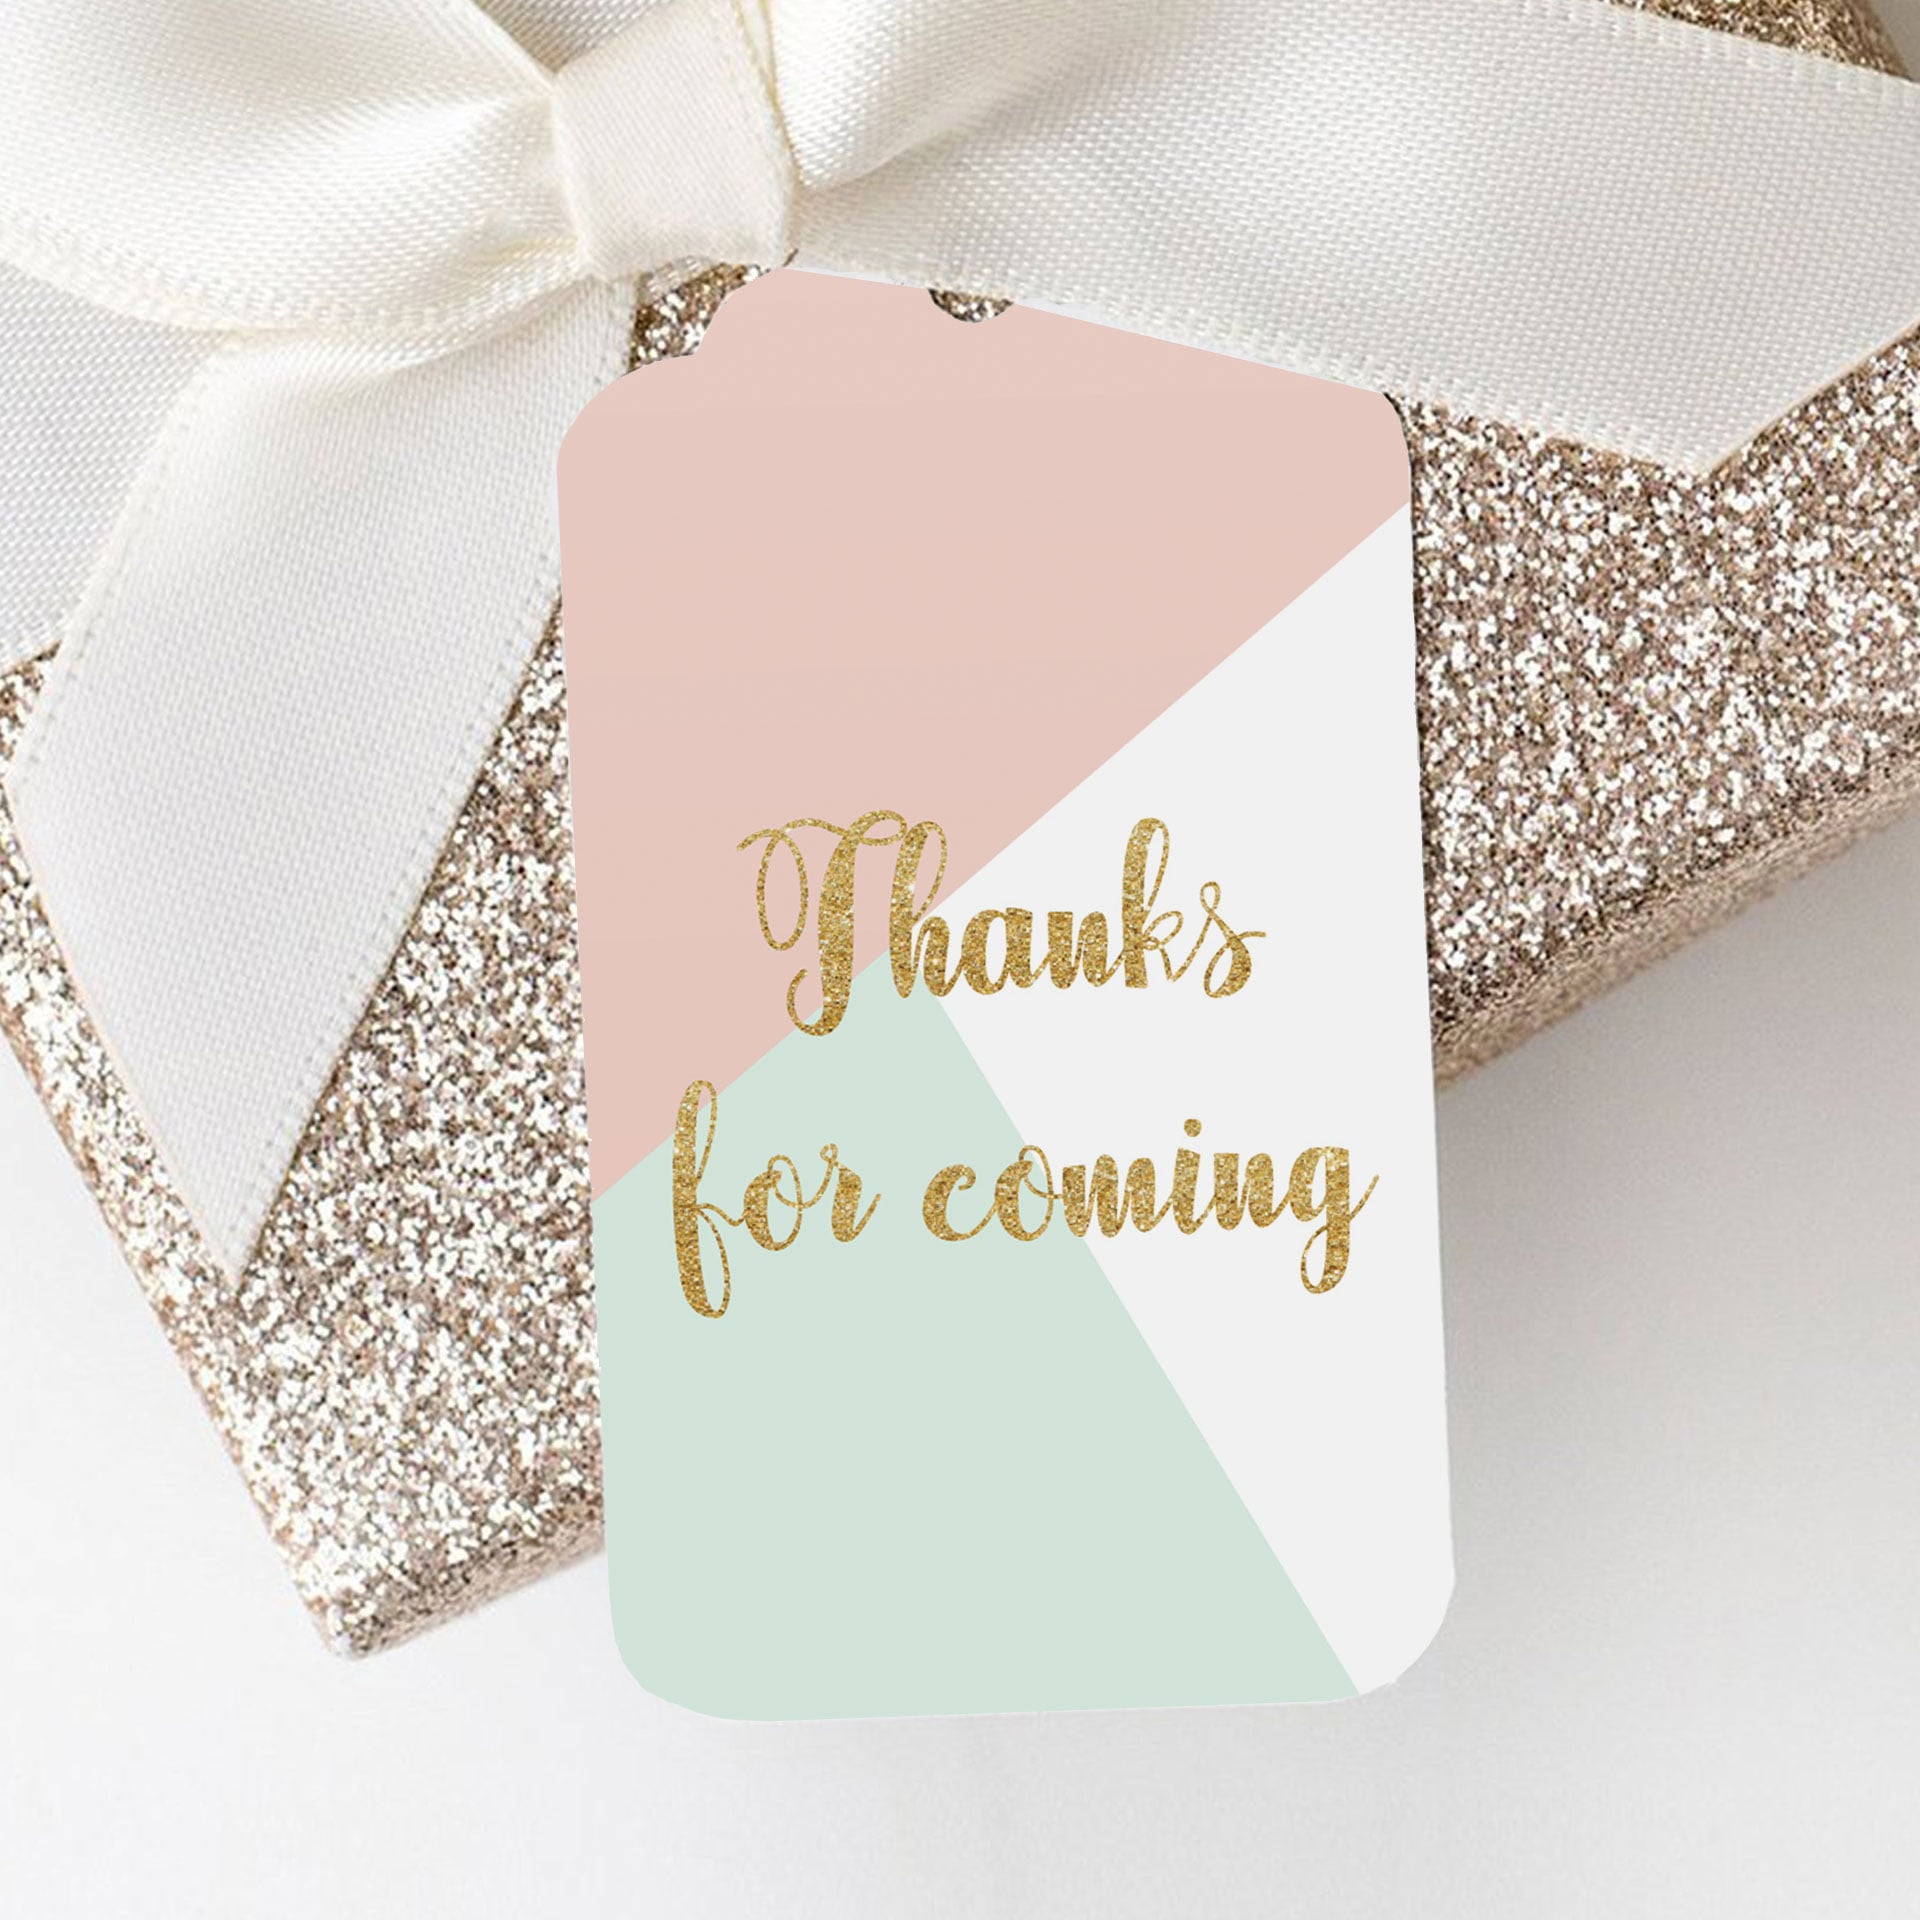 Printable favor tag for gender neutral baby shower by LittleSizzle